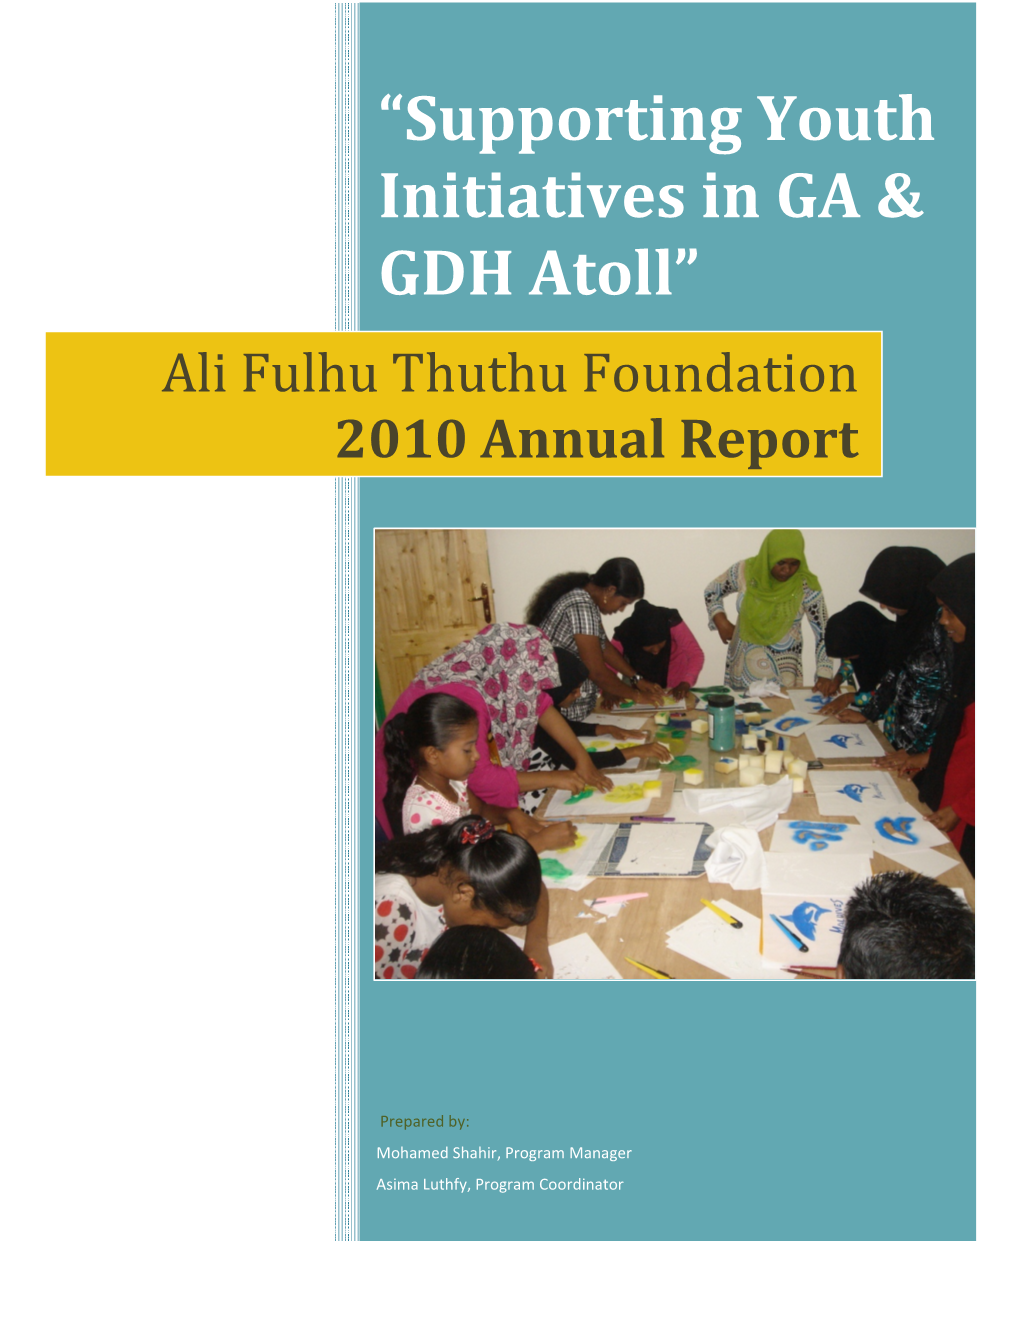 “Supporting Youth Initiatives in GA & GDH Atoll”